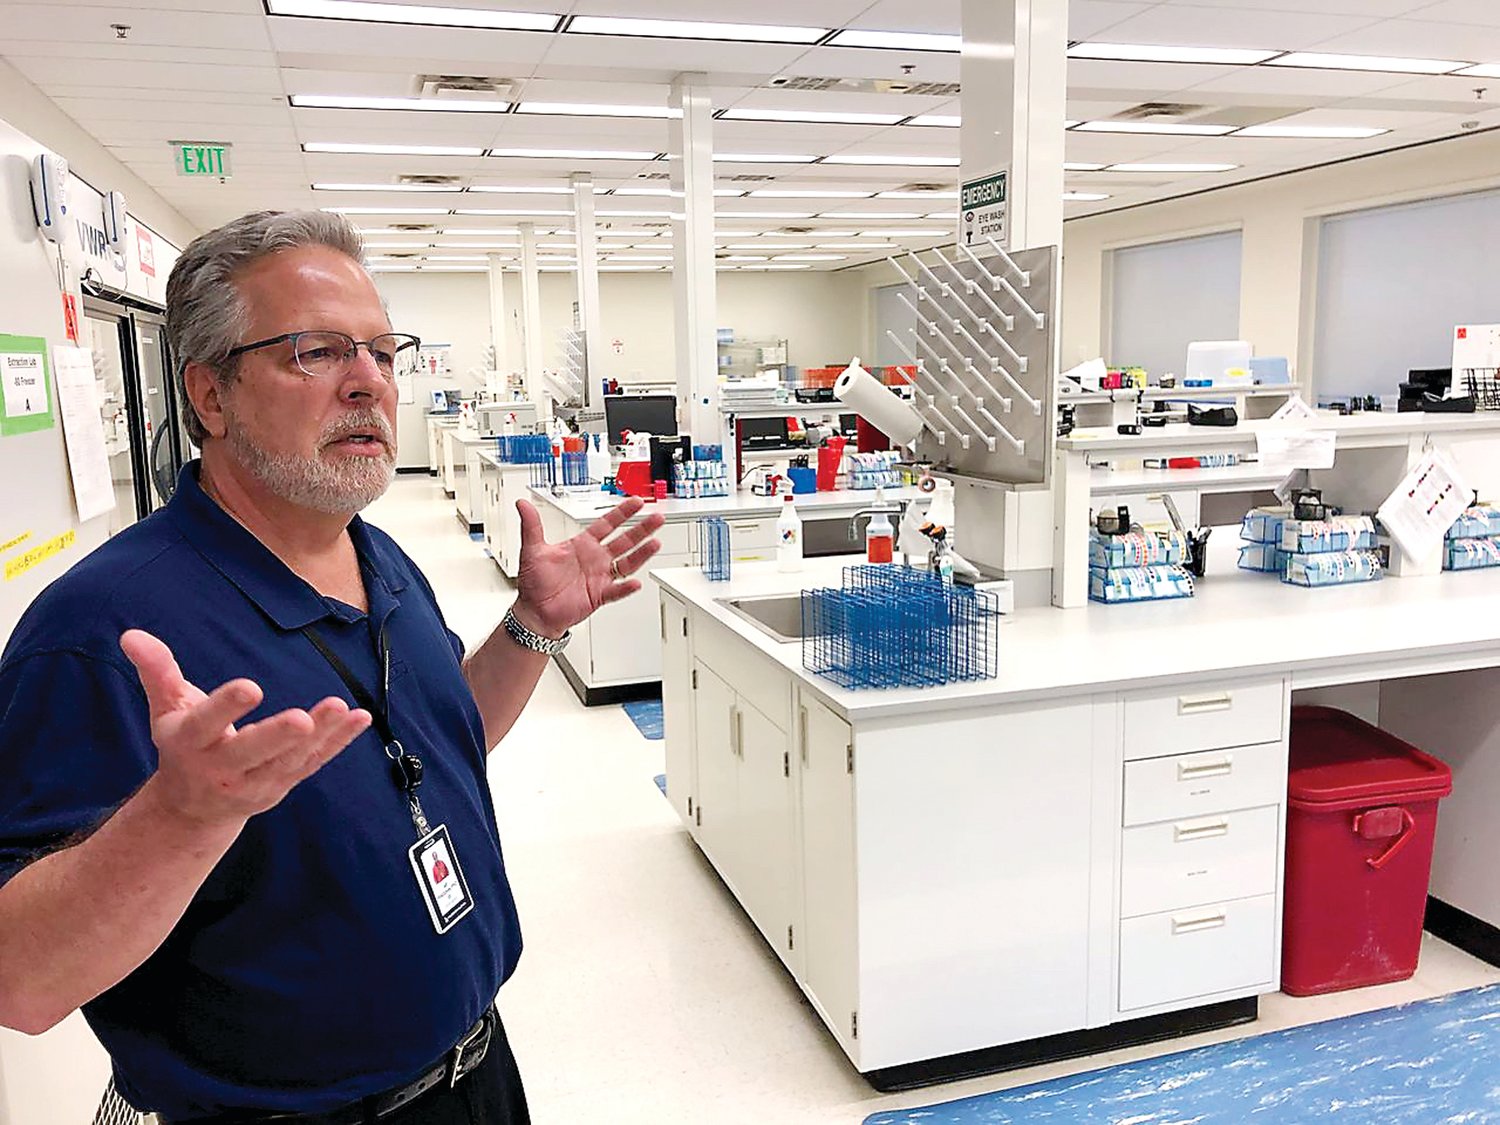 Delaware Valley alumnus Dr. Jeffrey Wisotzkey is working on COVID-19 testing at Diatherix, a company in Huntsville, Ala. Photograph by Lee Roop.